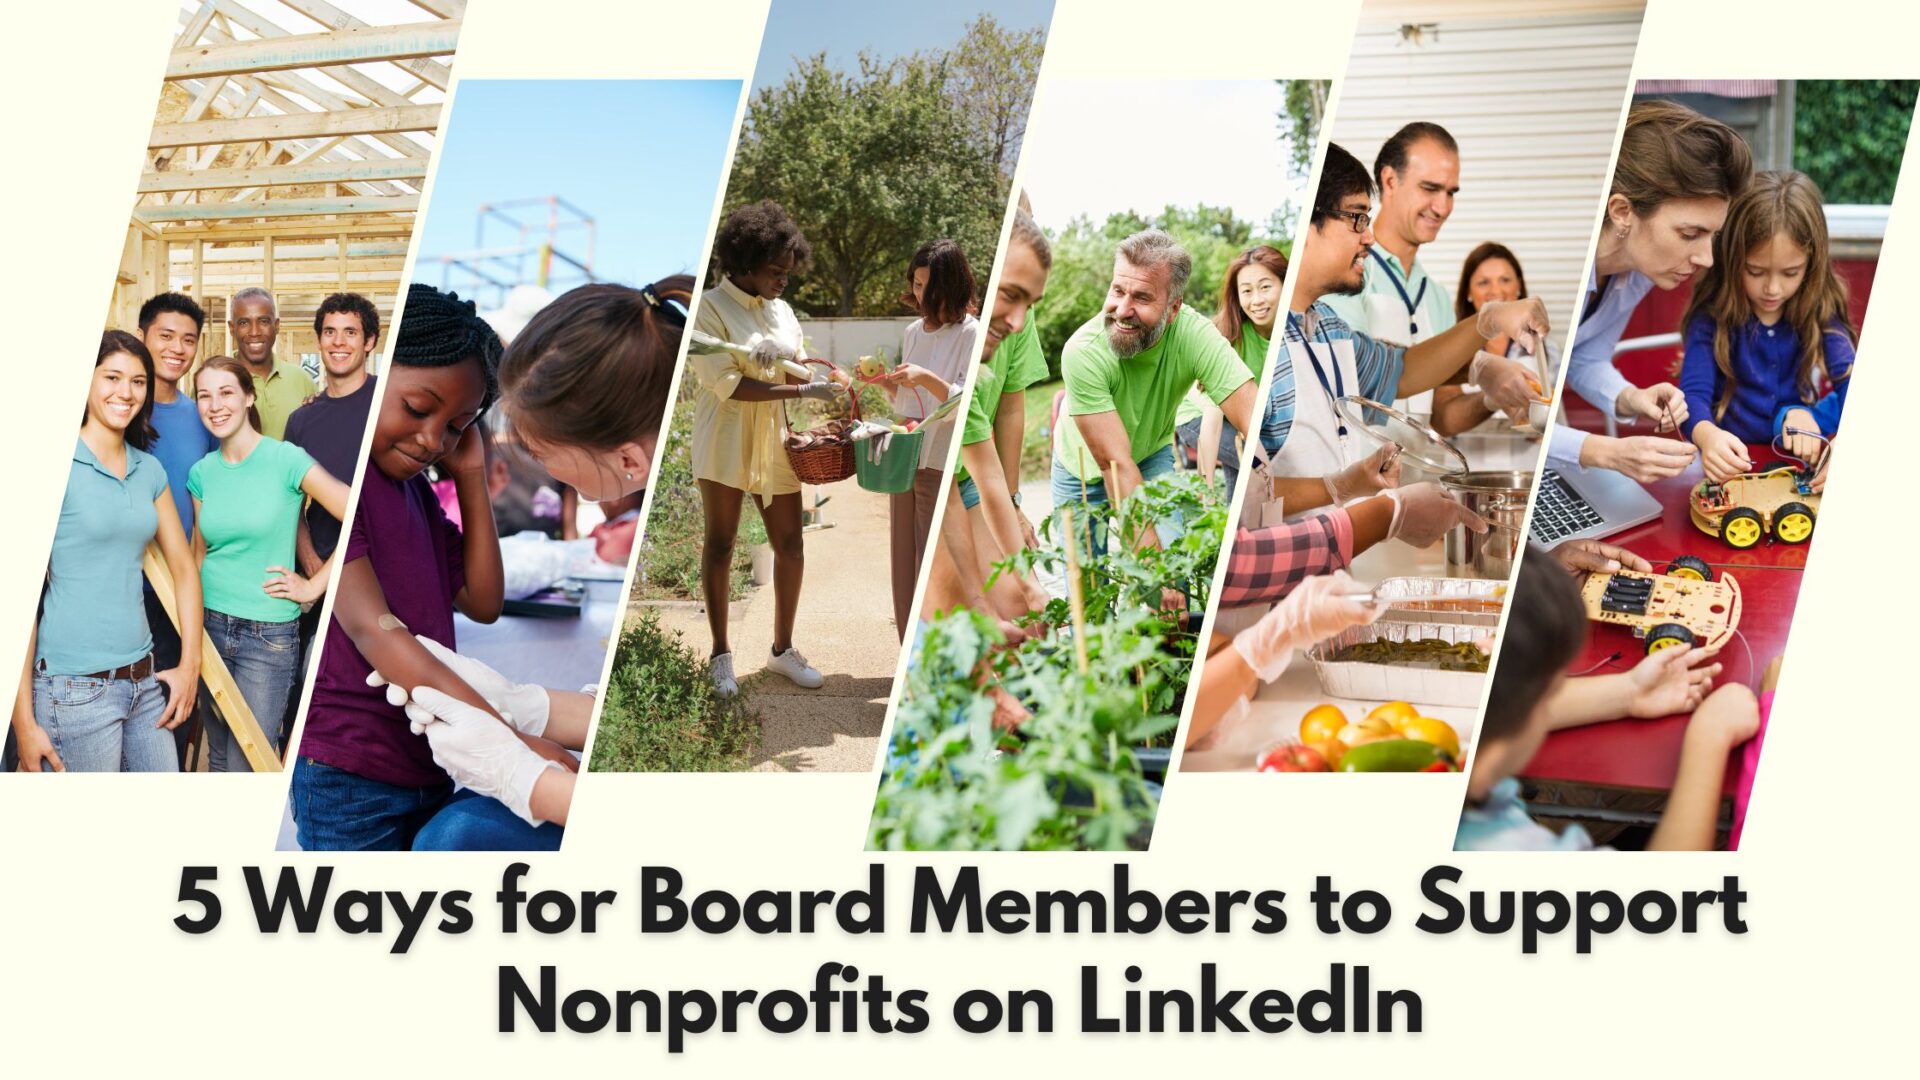 5 Ways for Board Members to Support Nonprofits on LinkedIn cover image